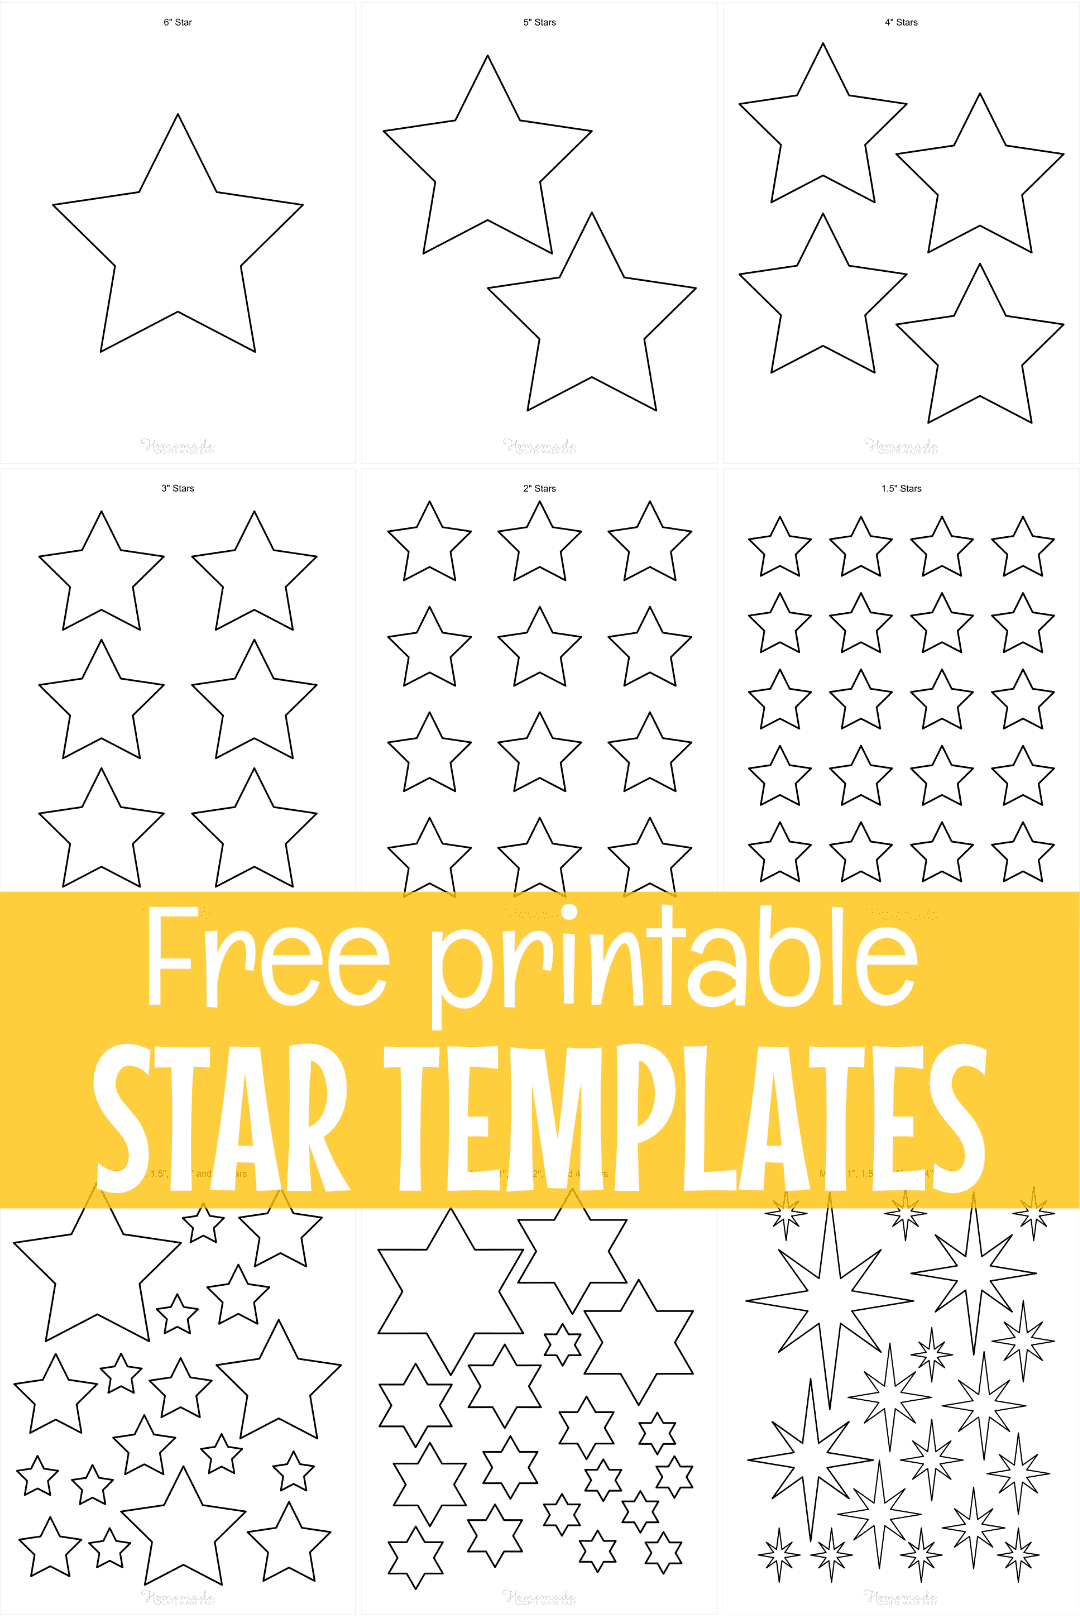 Free Printable Star & Outlines - Small to Large Sizes, 1 inch to 8 inch